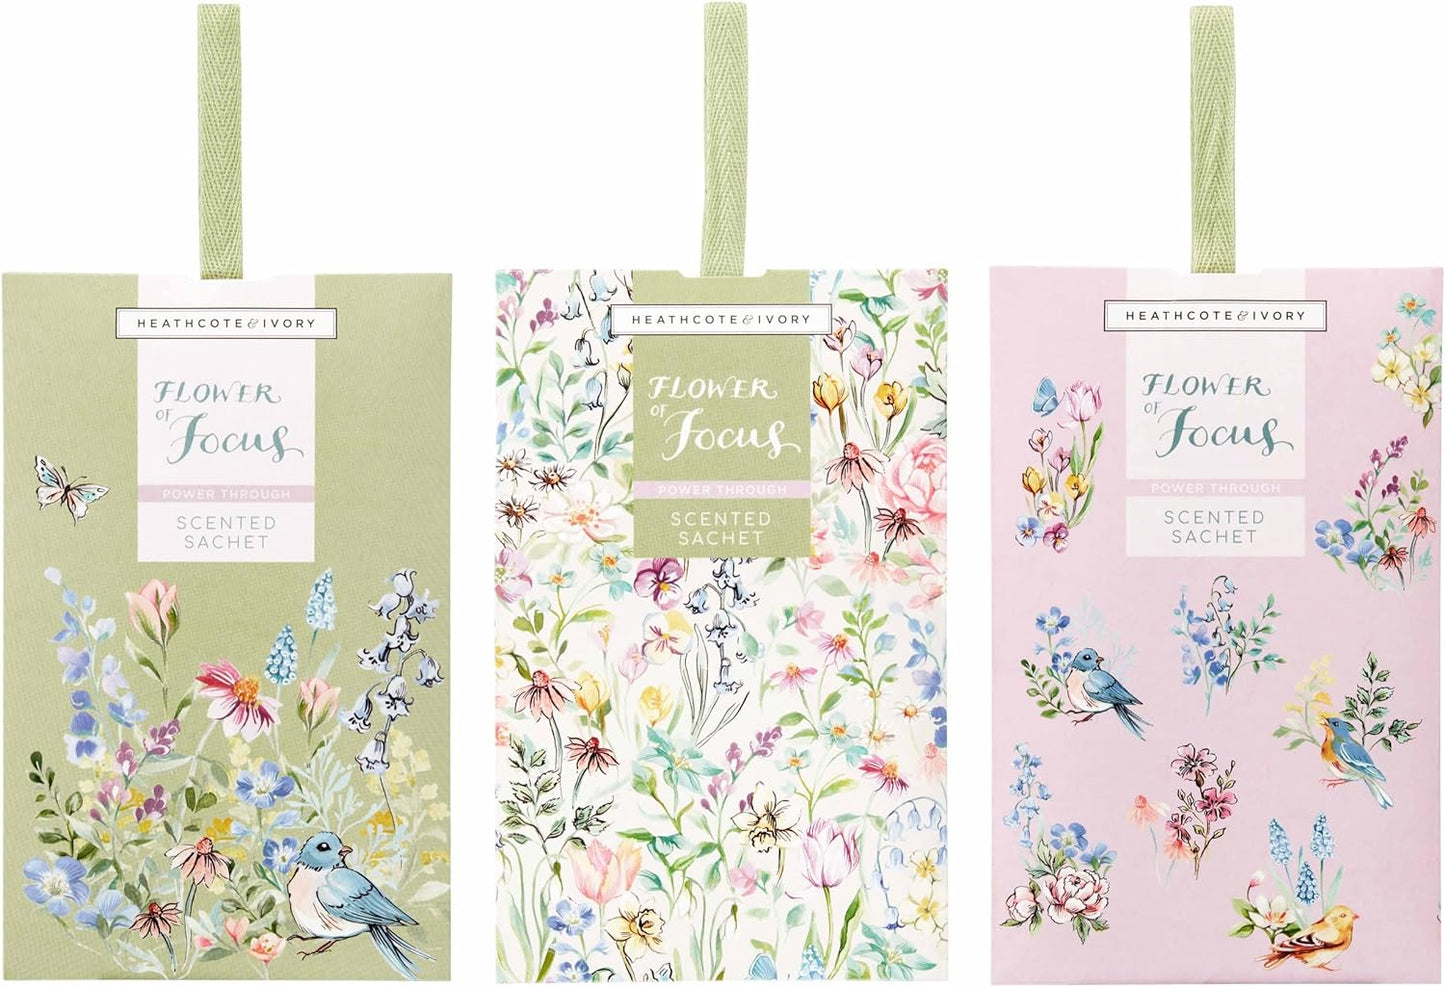 Heathcote & Ivory Flower of Focus 3 Scented Sachets | Freshen Spaces Around The Home | Enriched With Essential Oils | Cruelty Free & Vegan Friendly